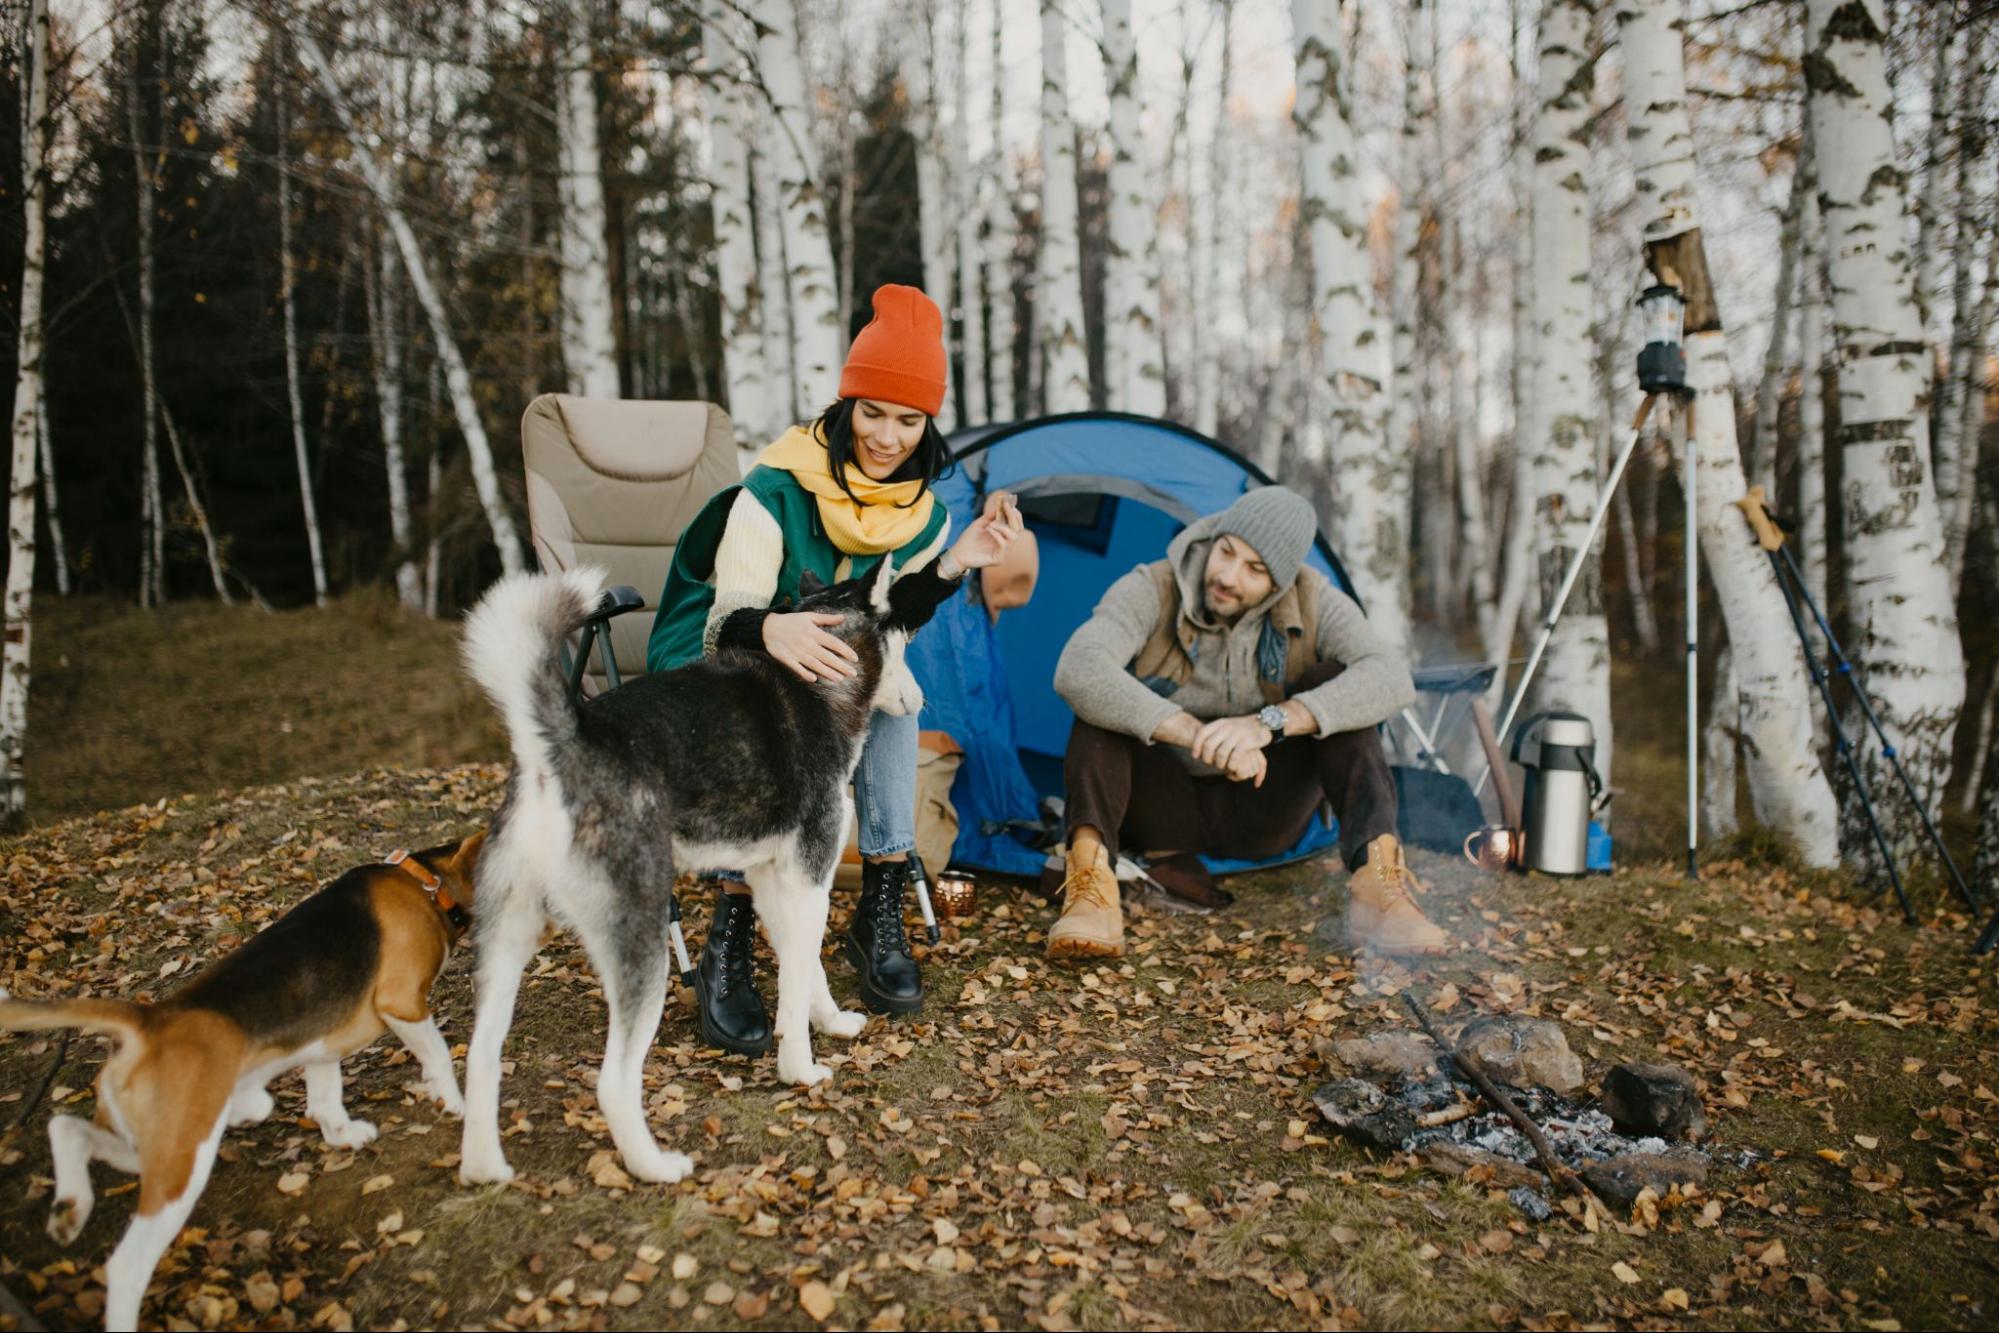 Winter Camping Gear Checklist: Top Sustainable Essentials for Cold-Weather Outdoors